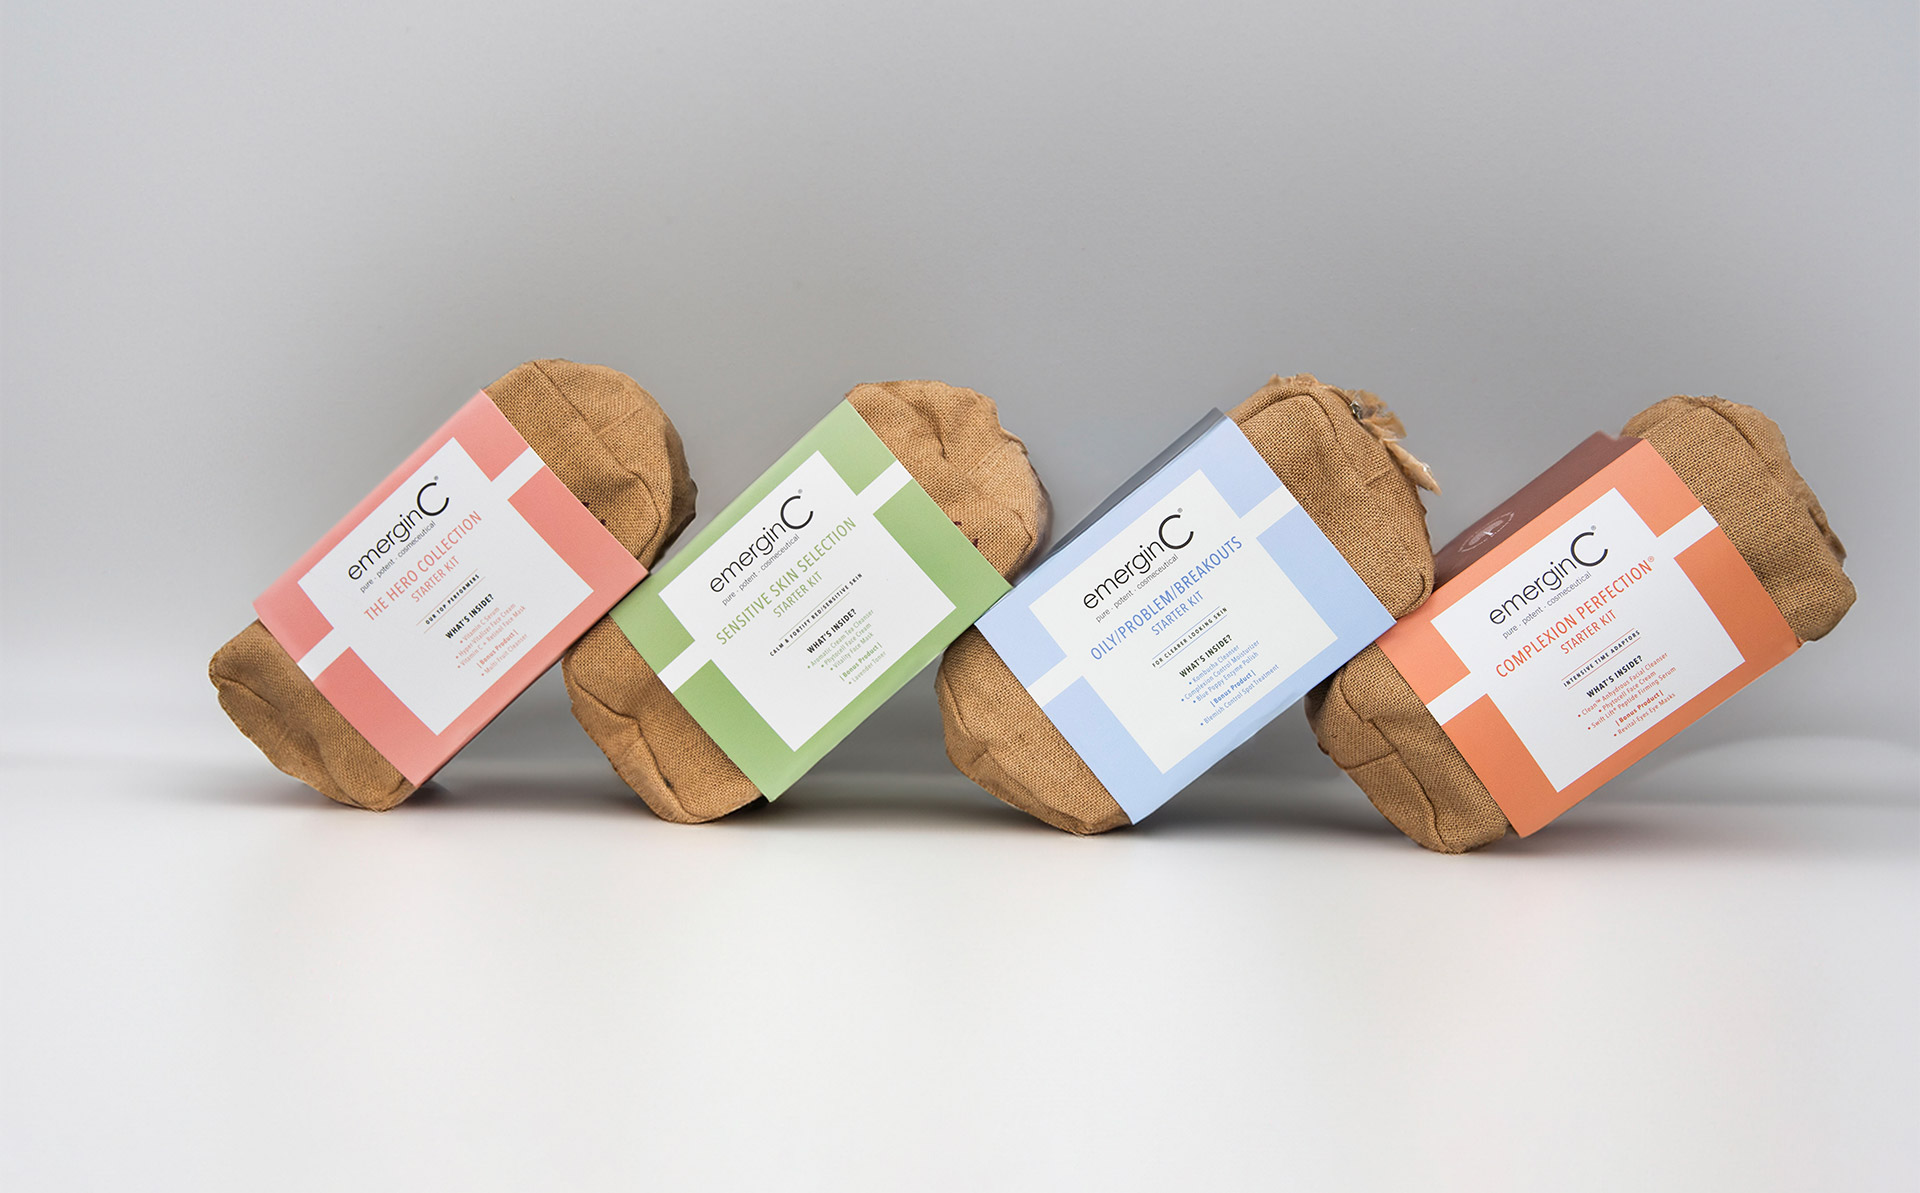 four emerginC Kit products bundles together in eco friendly packaging.